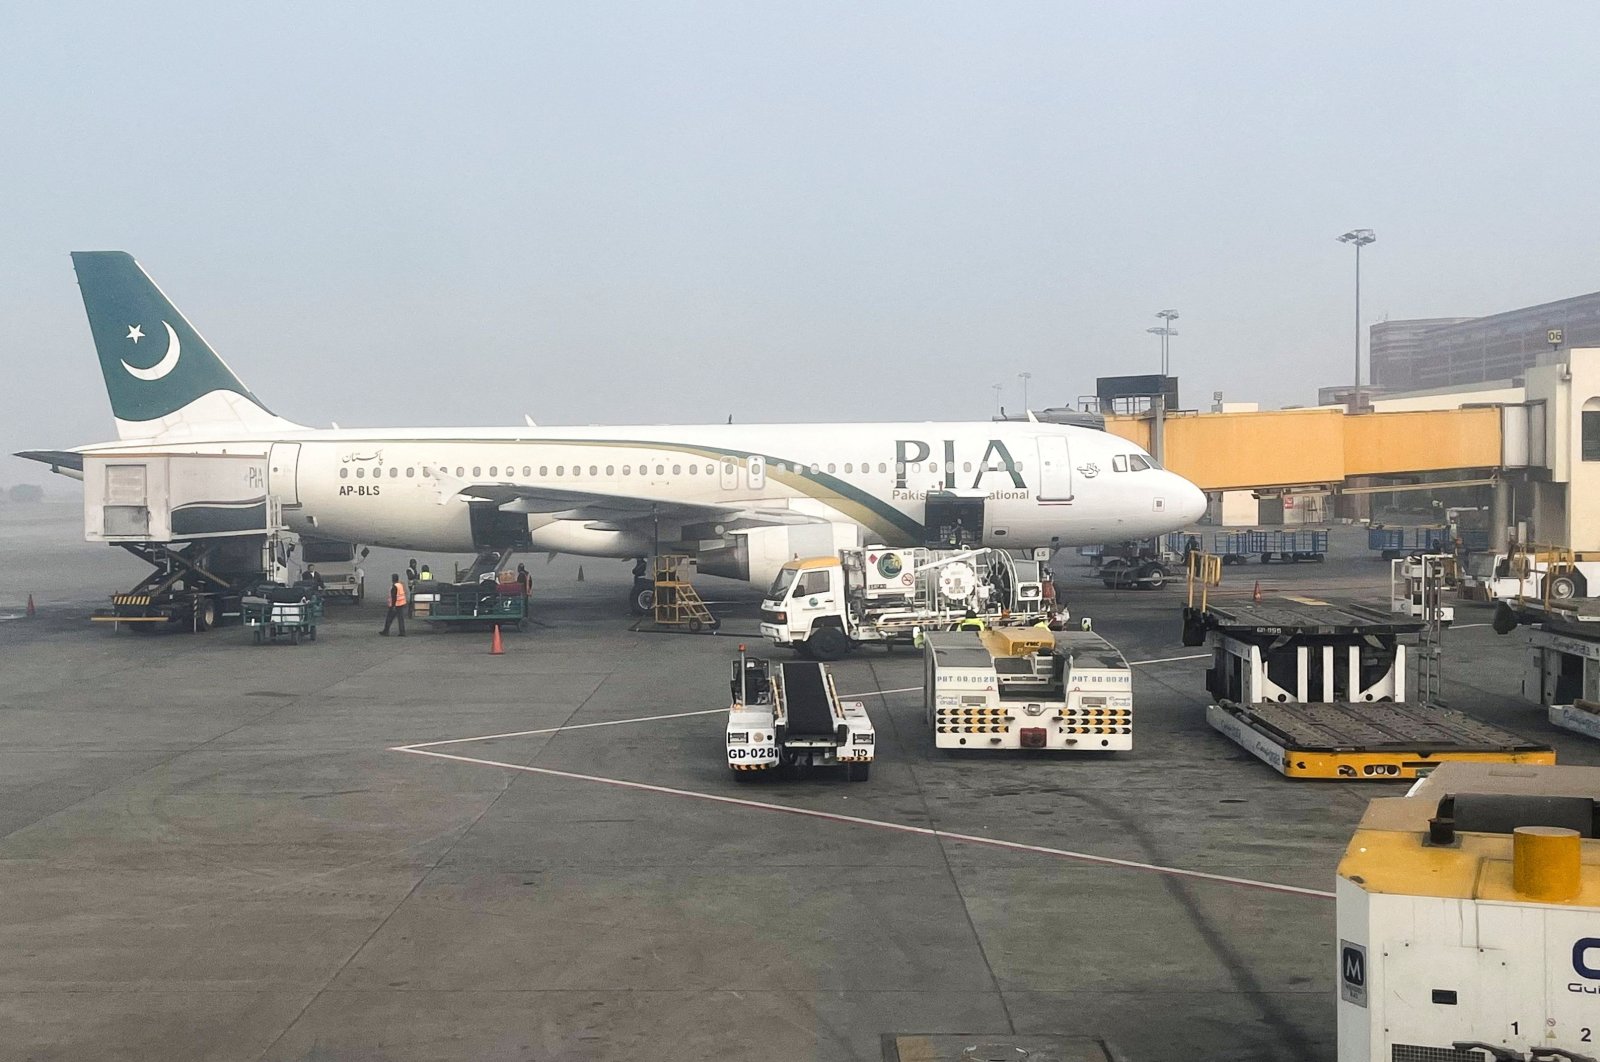 A view of a Pakistan International Airlines (PIA) passenger plane, taken through a glass panel, at the Allama Iqbal International Airport, Lahore, Pakistan Jan. 29, 2024. (Reuters Photo)